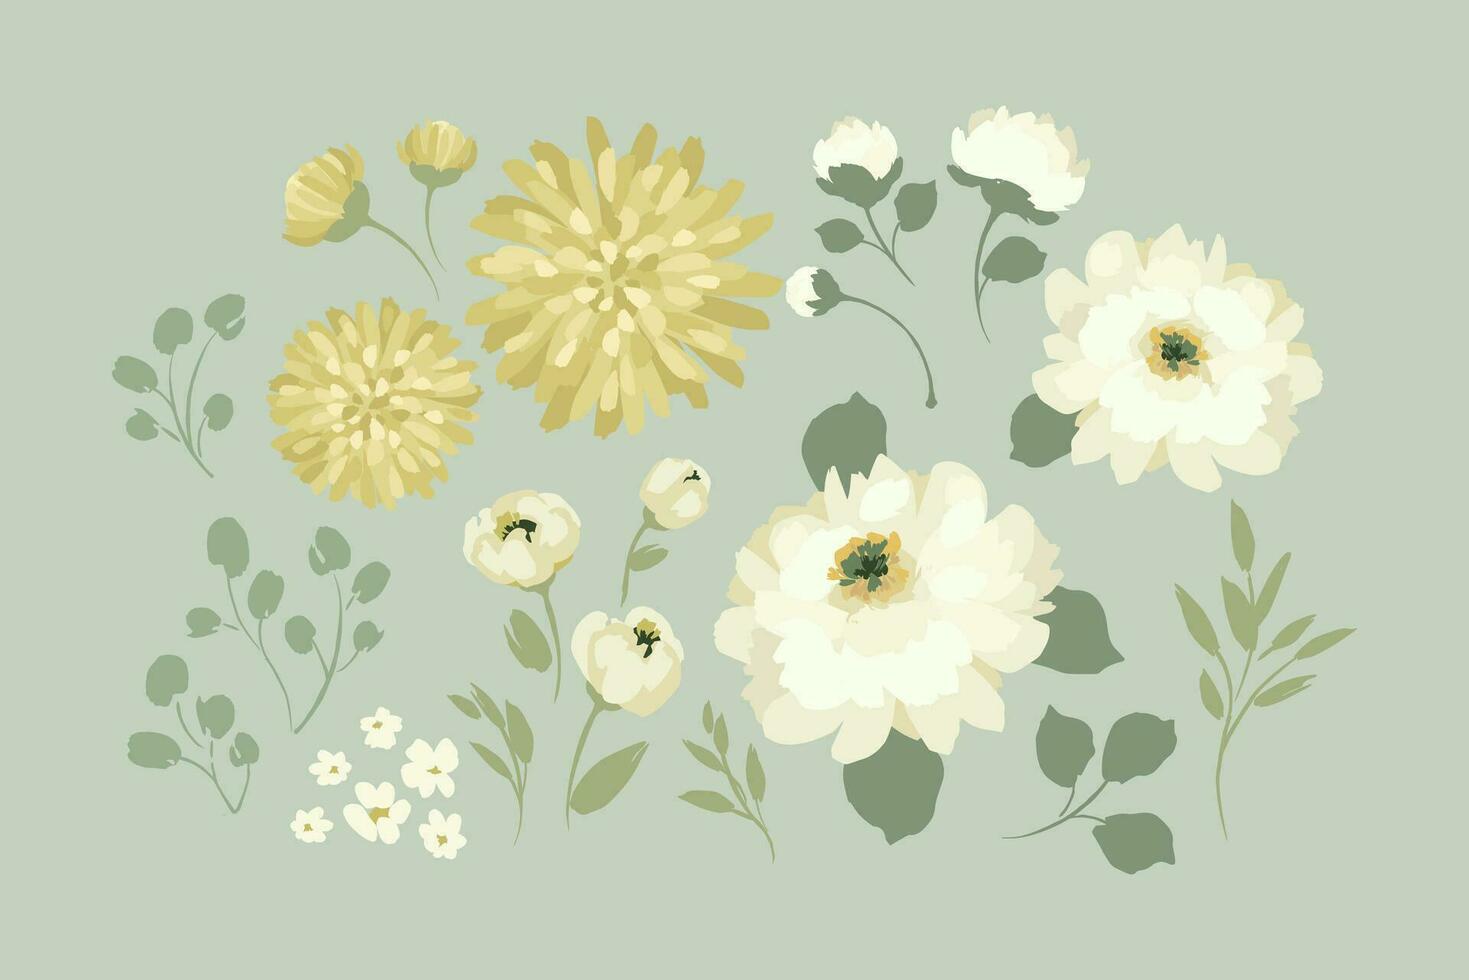 Set of abstract floral design elements. Leaves, flowers, grass, branches. Vector illustrations